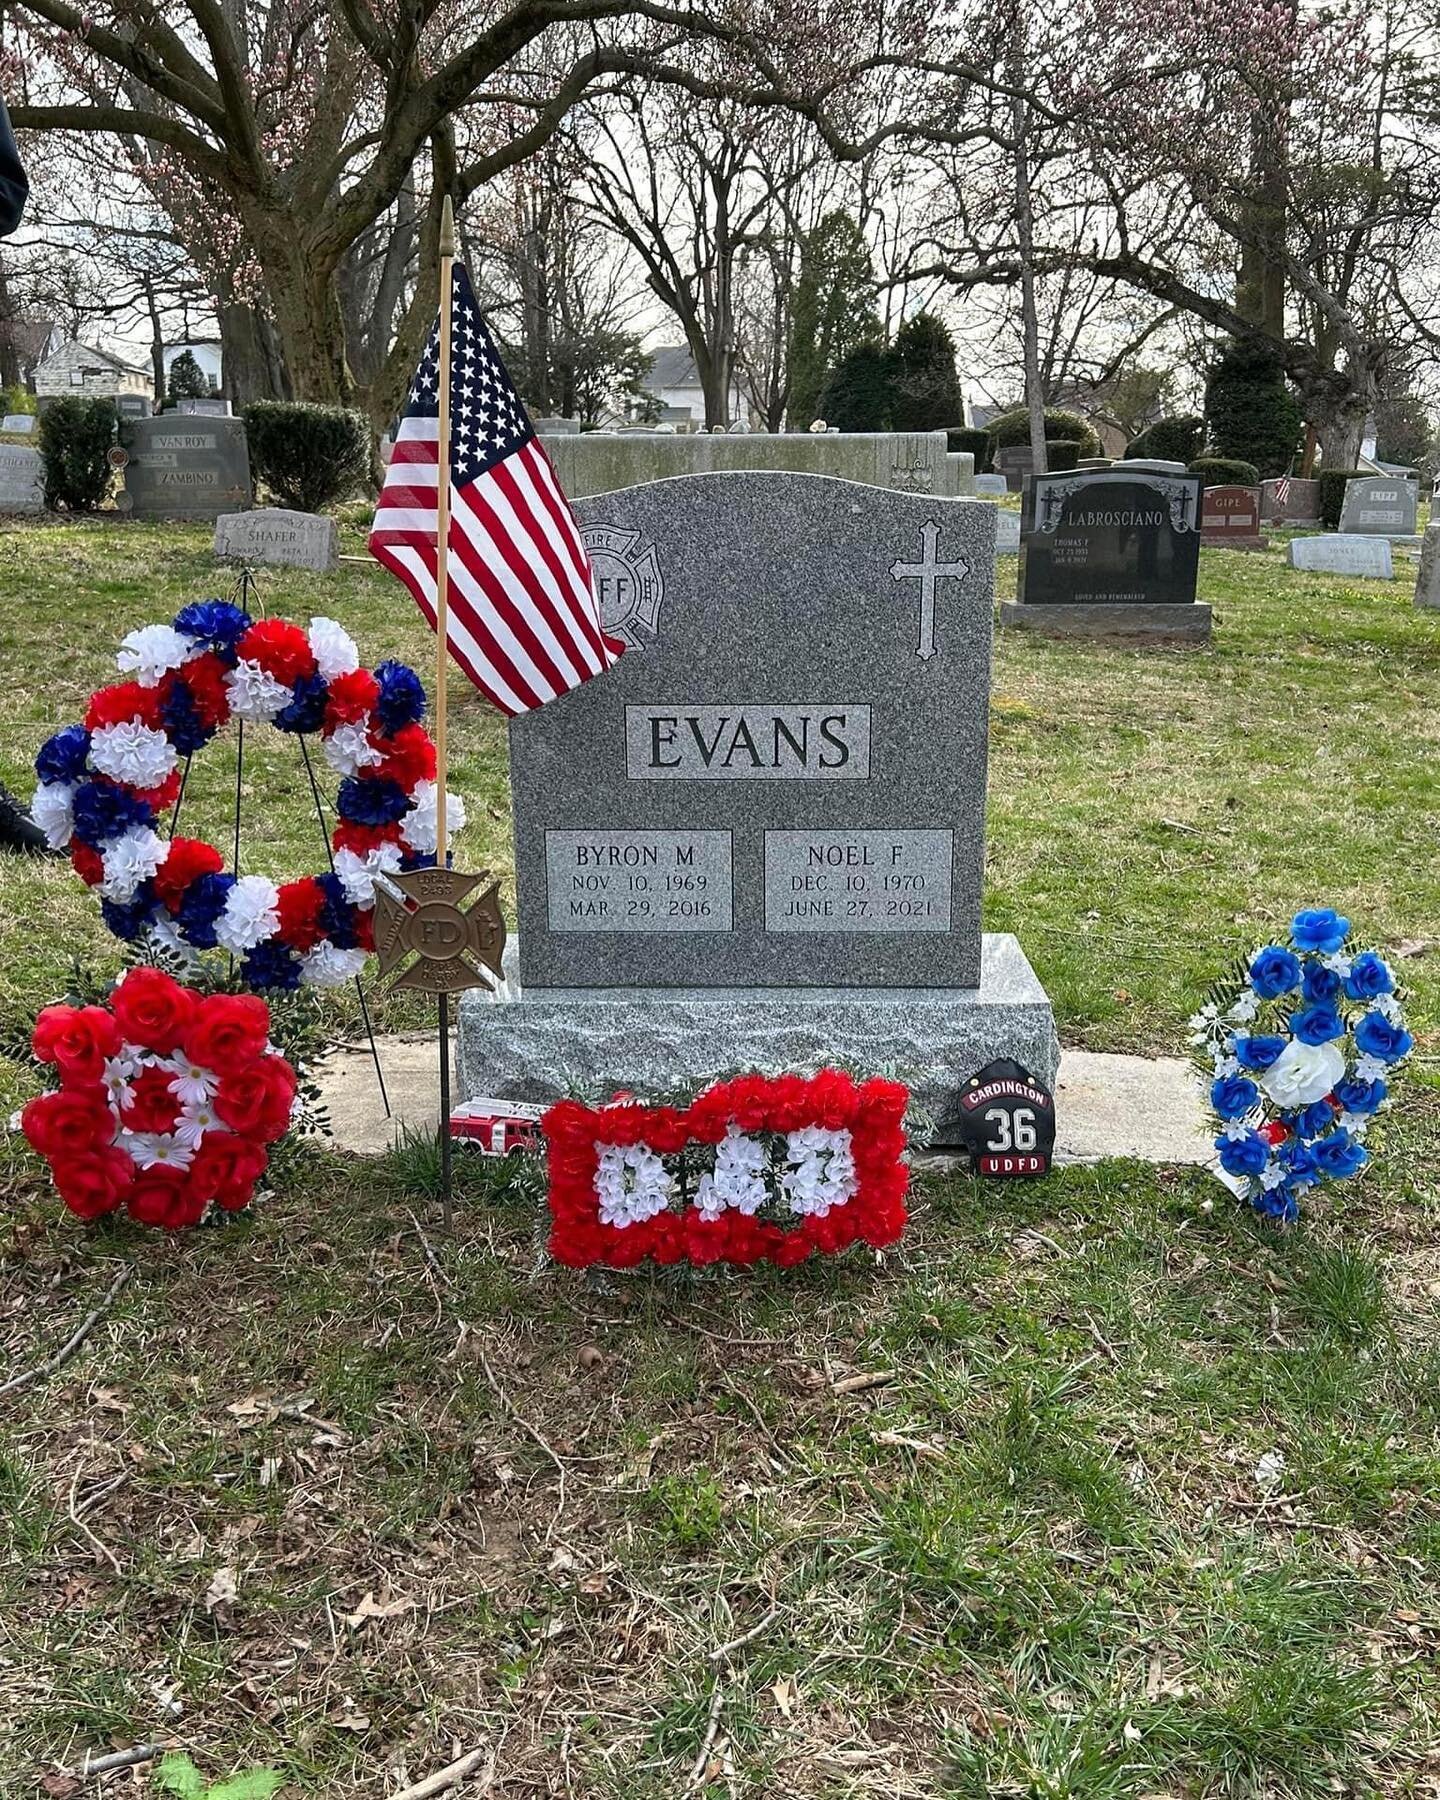 For the last 7 years, March 29th has been a somber day for the members and families of Local 2493. On March 29th, 2016 Firefighter Byron Evans of Station 37 on the B Platoon passed away from a line of duty related illness. Firefighter Evans was affec